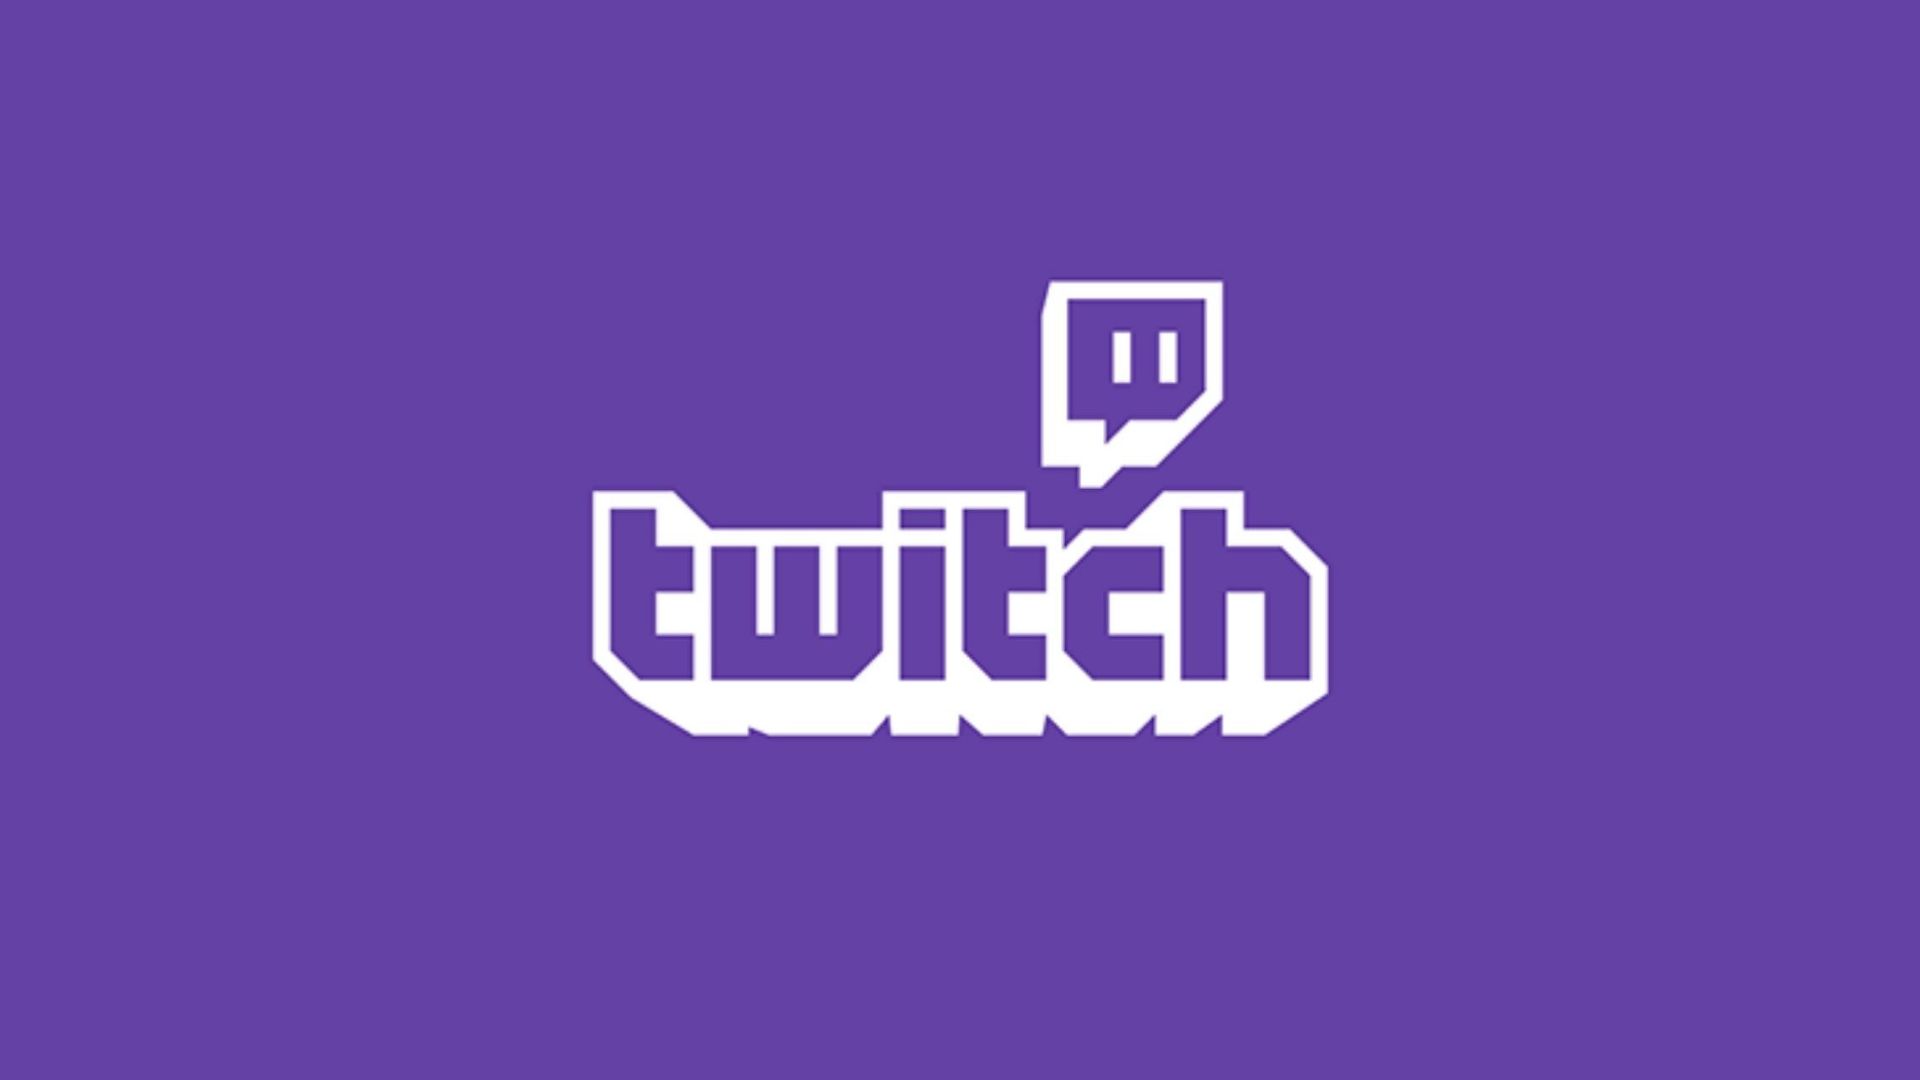 How do I subscribe to my favorite Twitch channel?